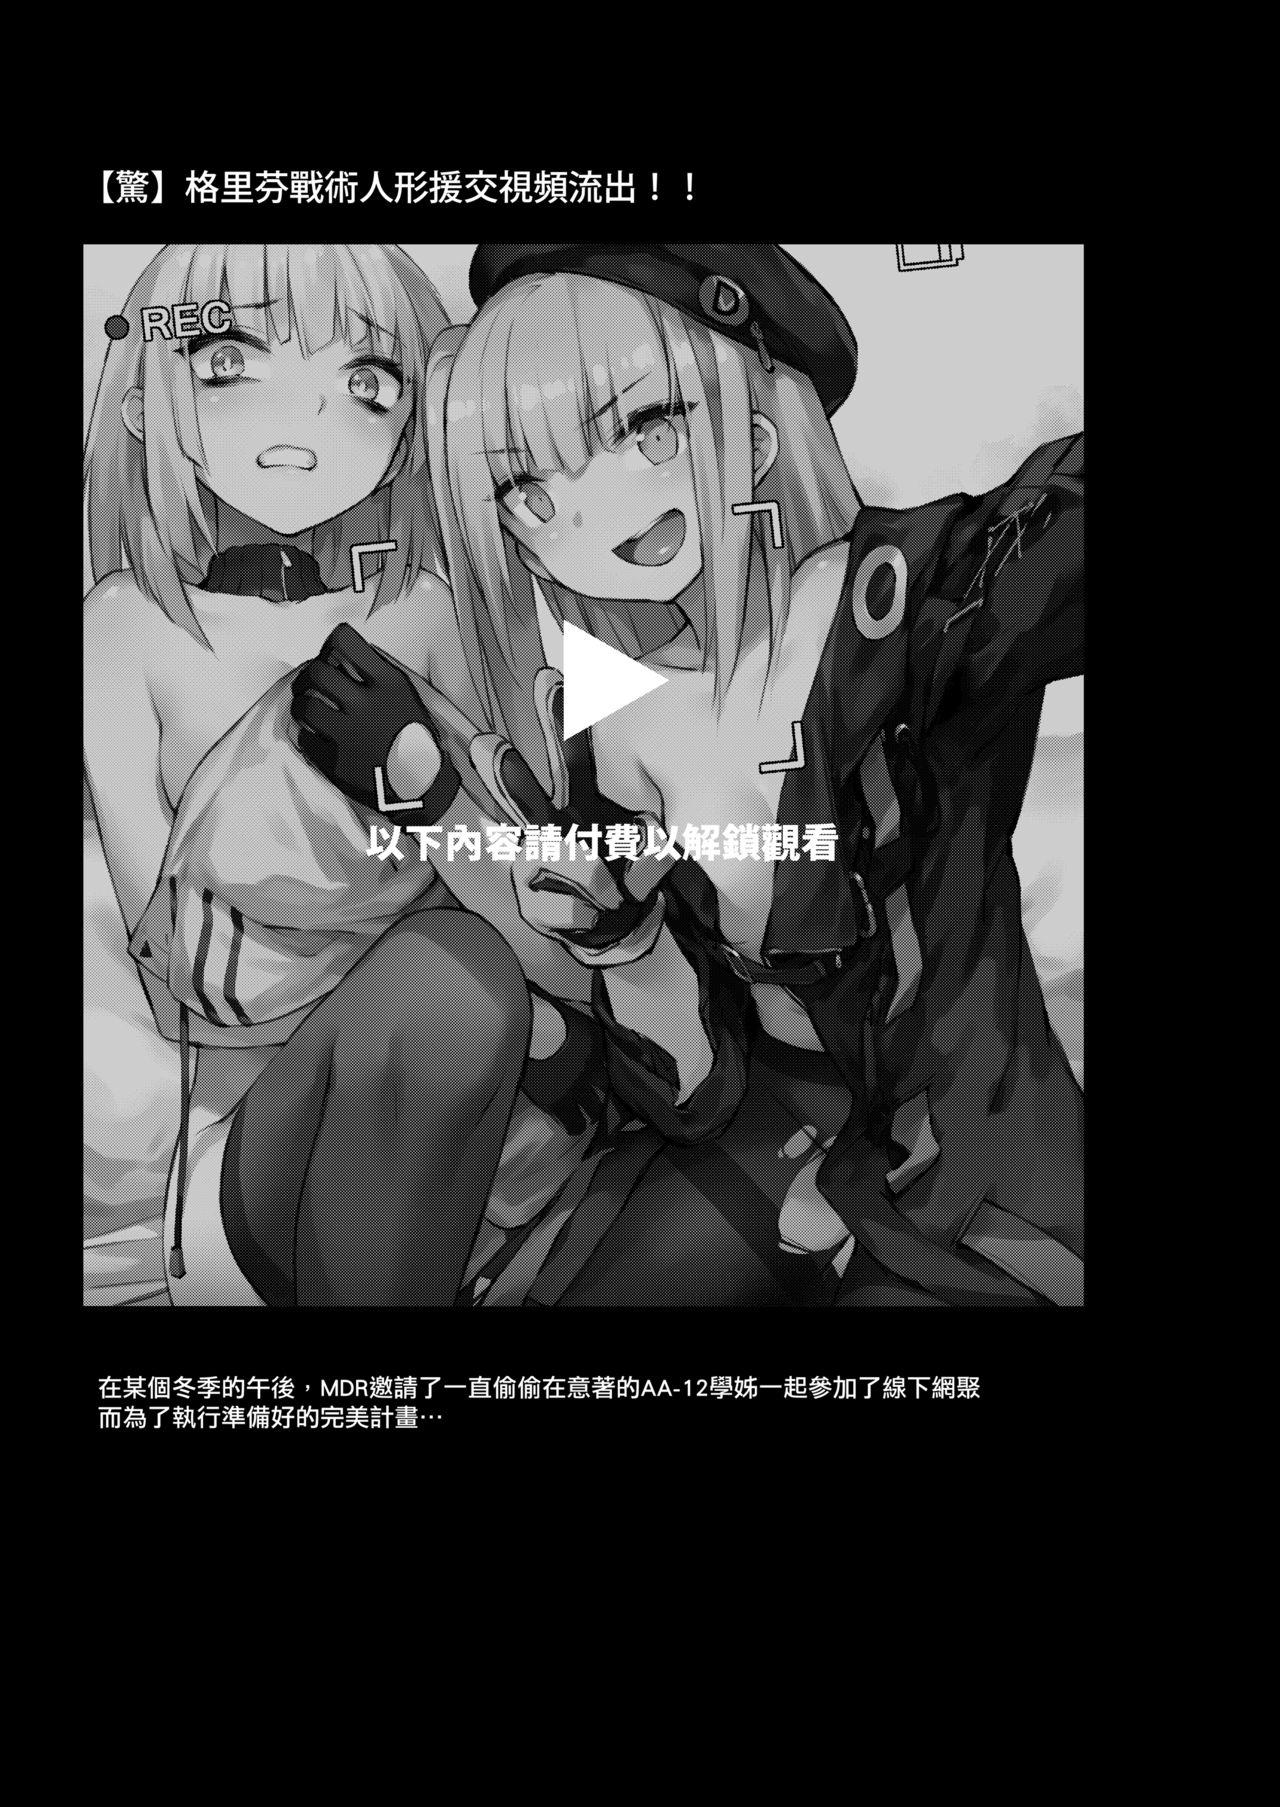 Cfnm A Video of Griffin T-Dolls Having Sex For Money Just Leaked! - Girls frontline Coroa - Page 2